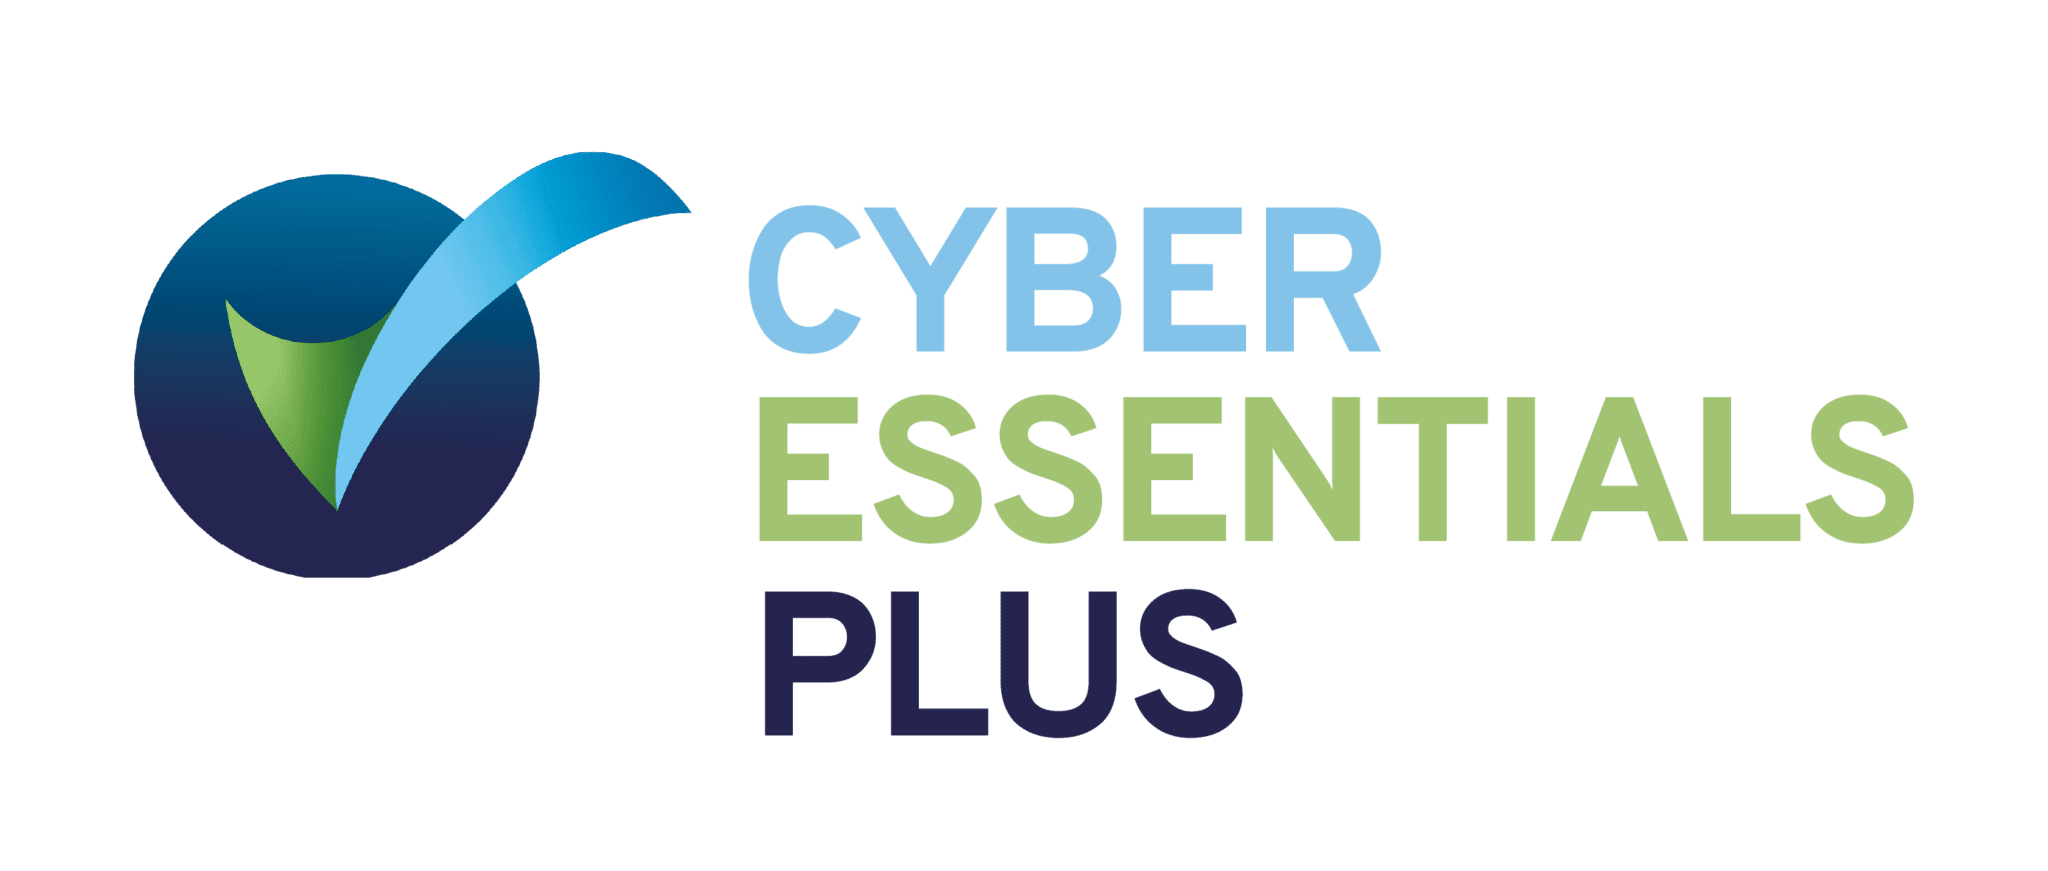 Cyber Essentials Plus. Cyber Security